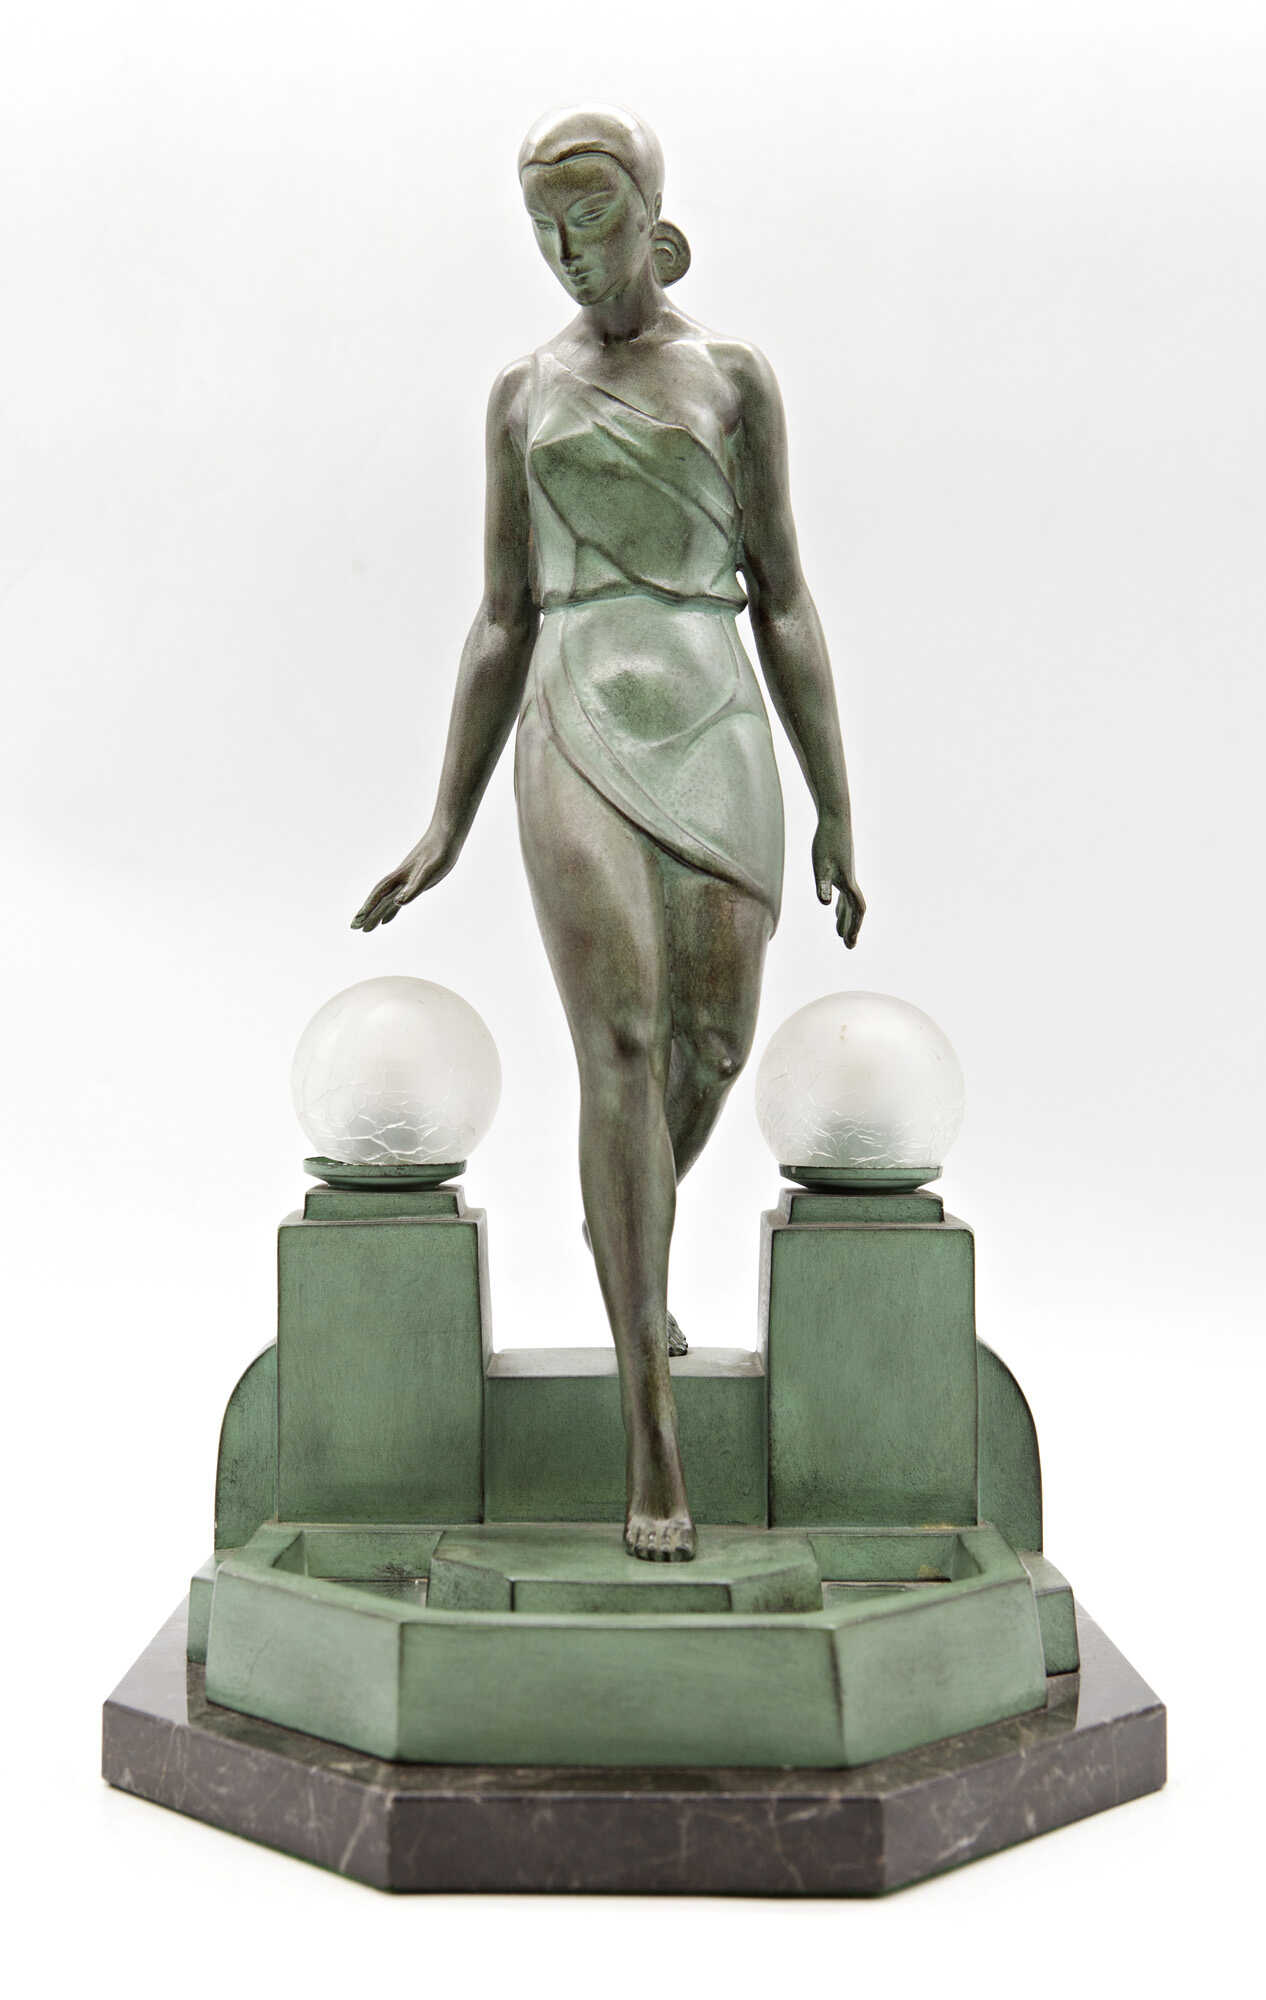 "Nausica" | Table lamp depicting maiden descending pool steps. 1930s. Artistic bronze with green patina on marble base, mirror and glass. Marked Fayral on the side and Le Verrier on the back. (26x45x25 cm.) (defects and breaks )